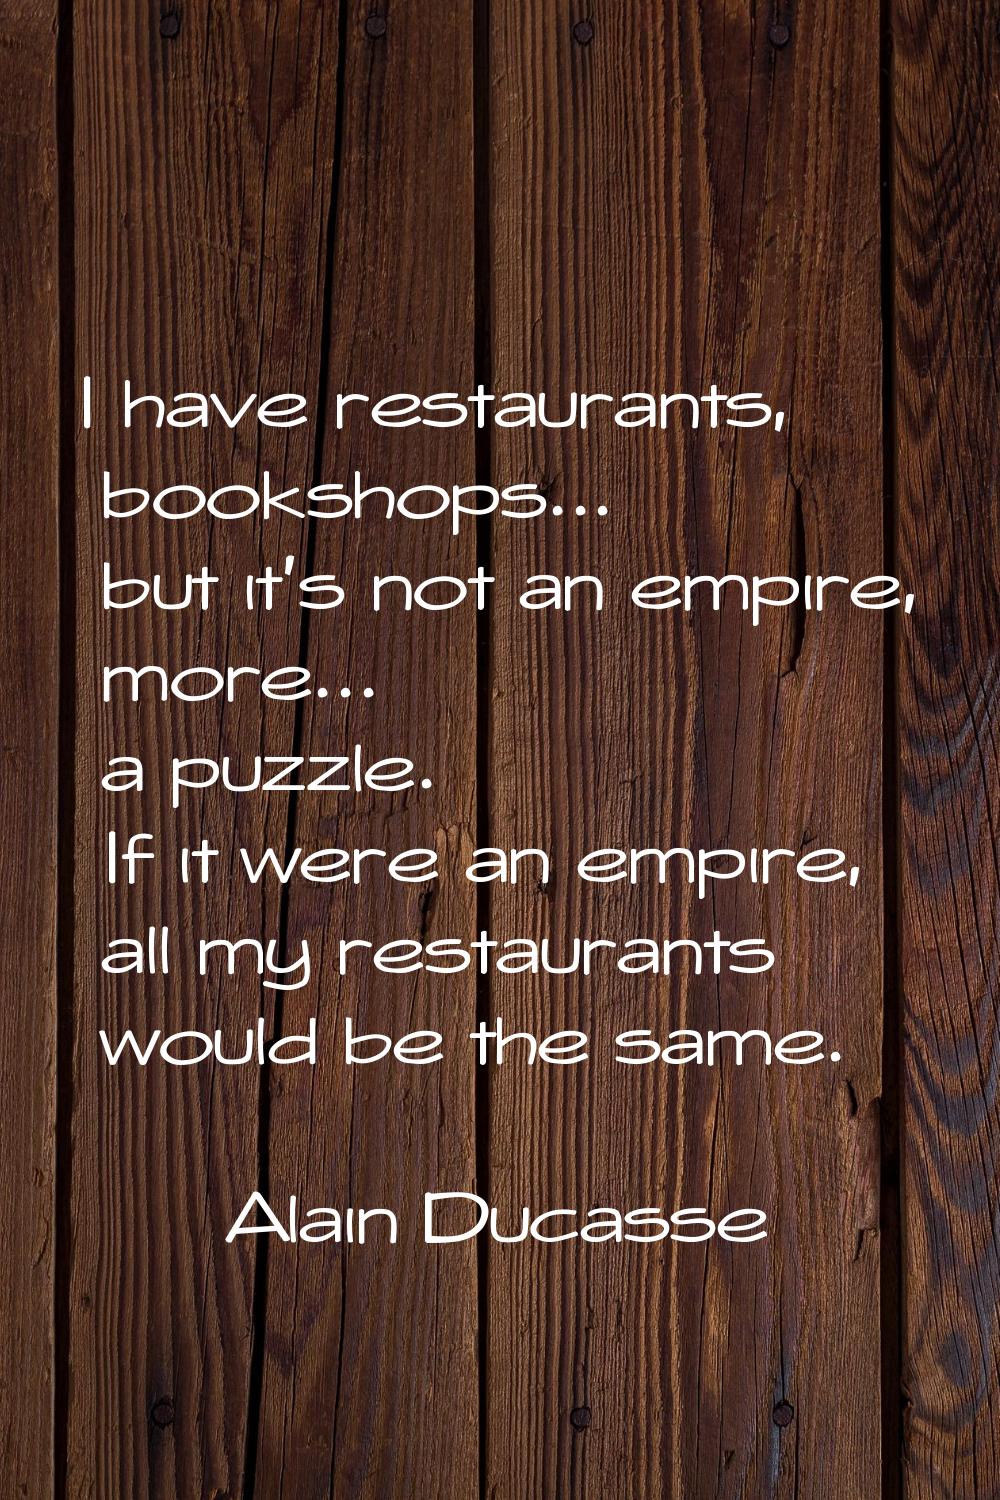 I have restaurants, bookshops... but it's not an empire, more... a puzzle. If it were an empire, al